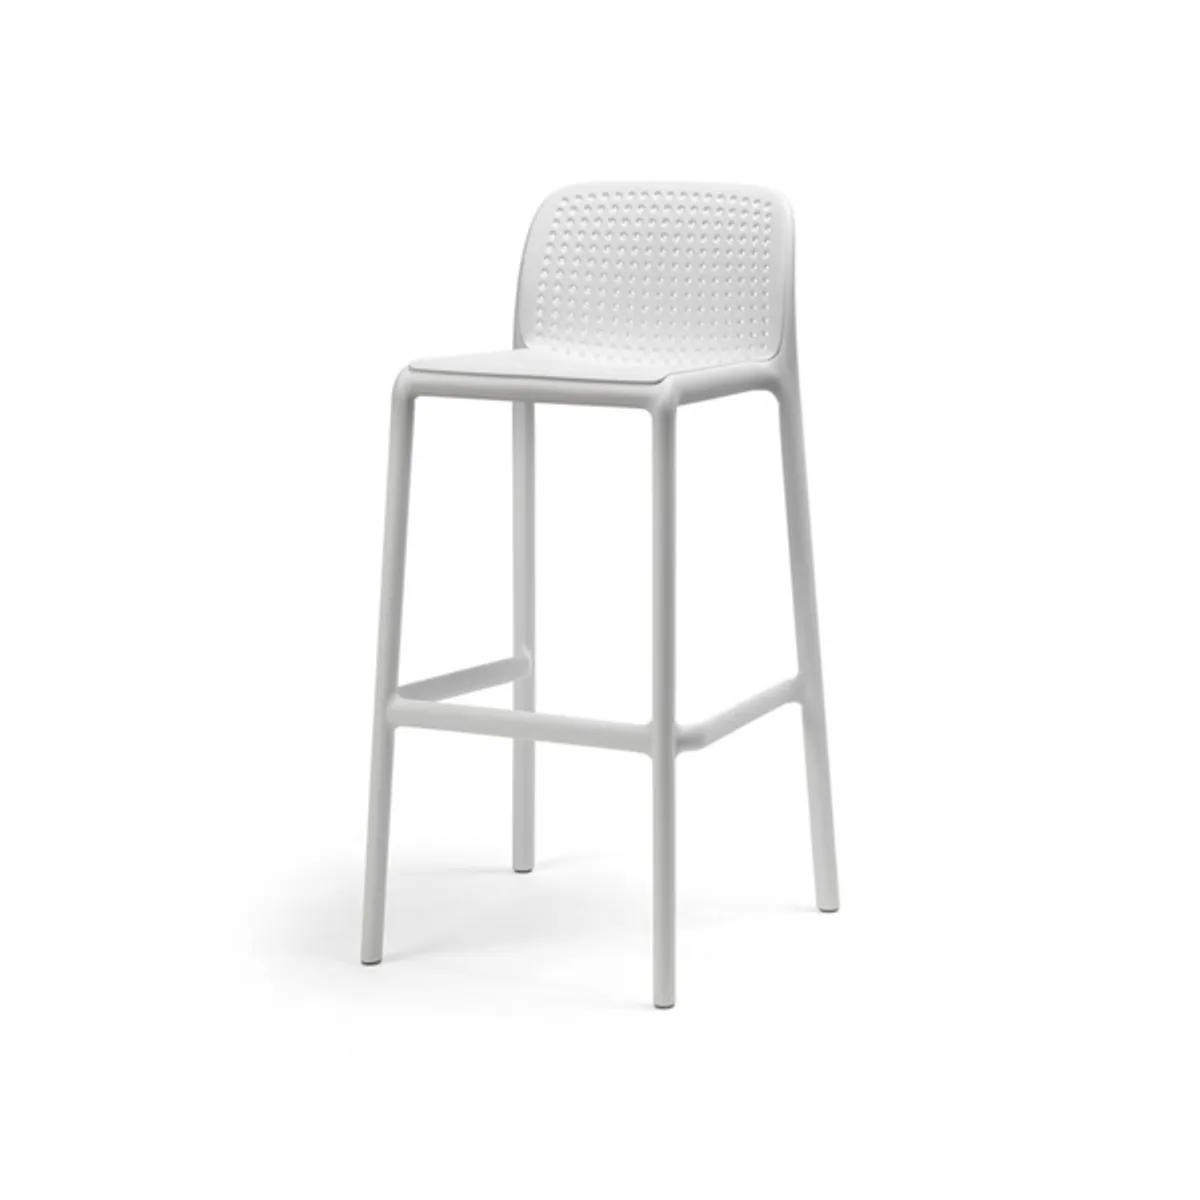 Lido bar stool Inside Out Contracts1